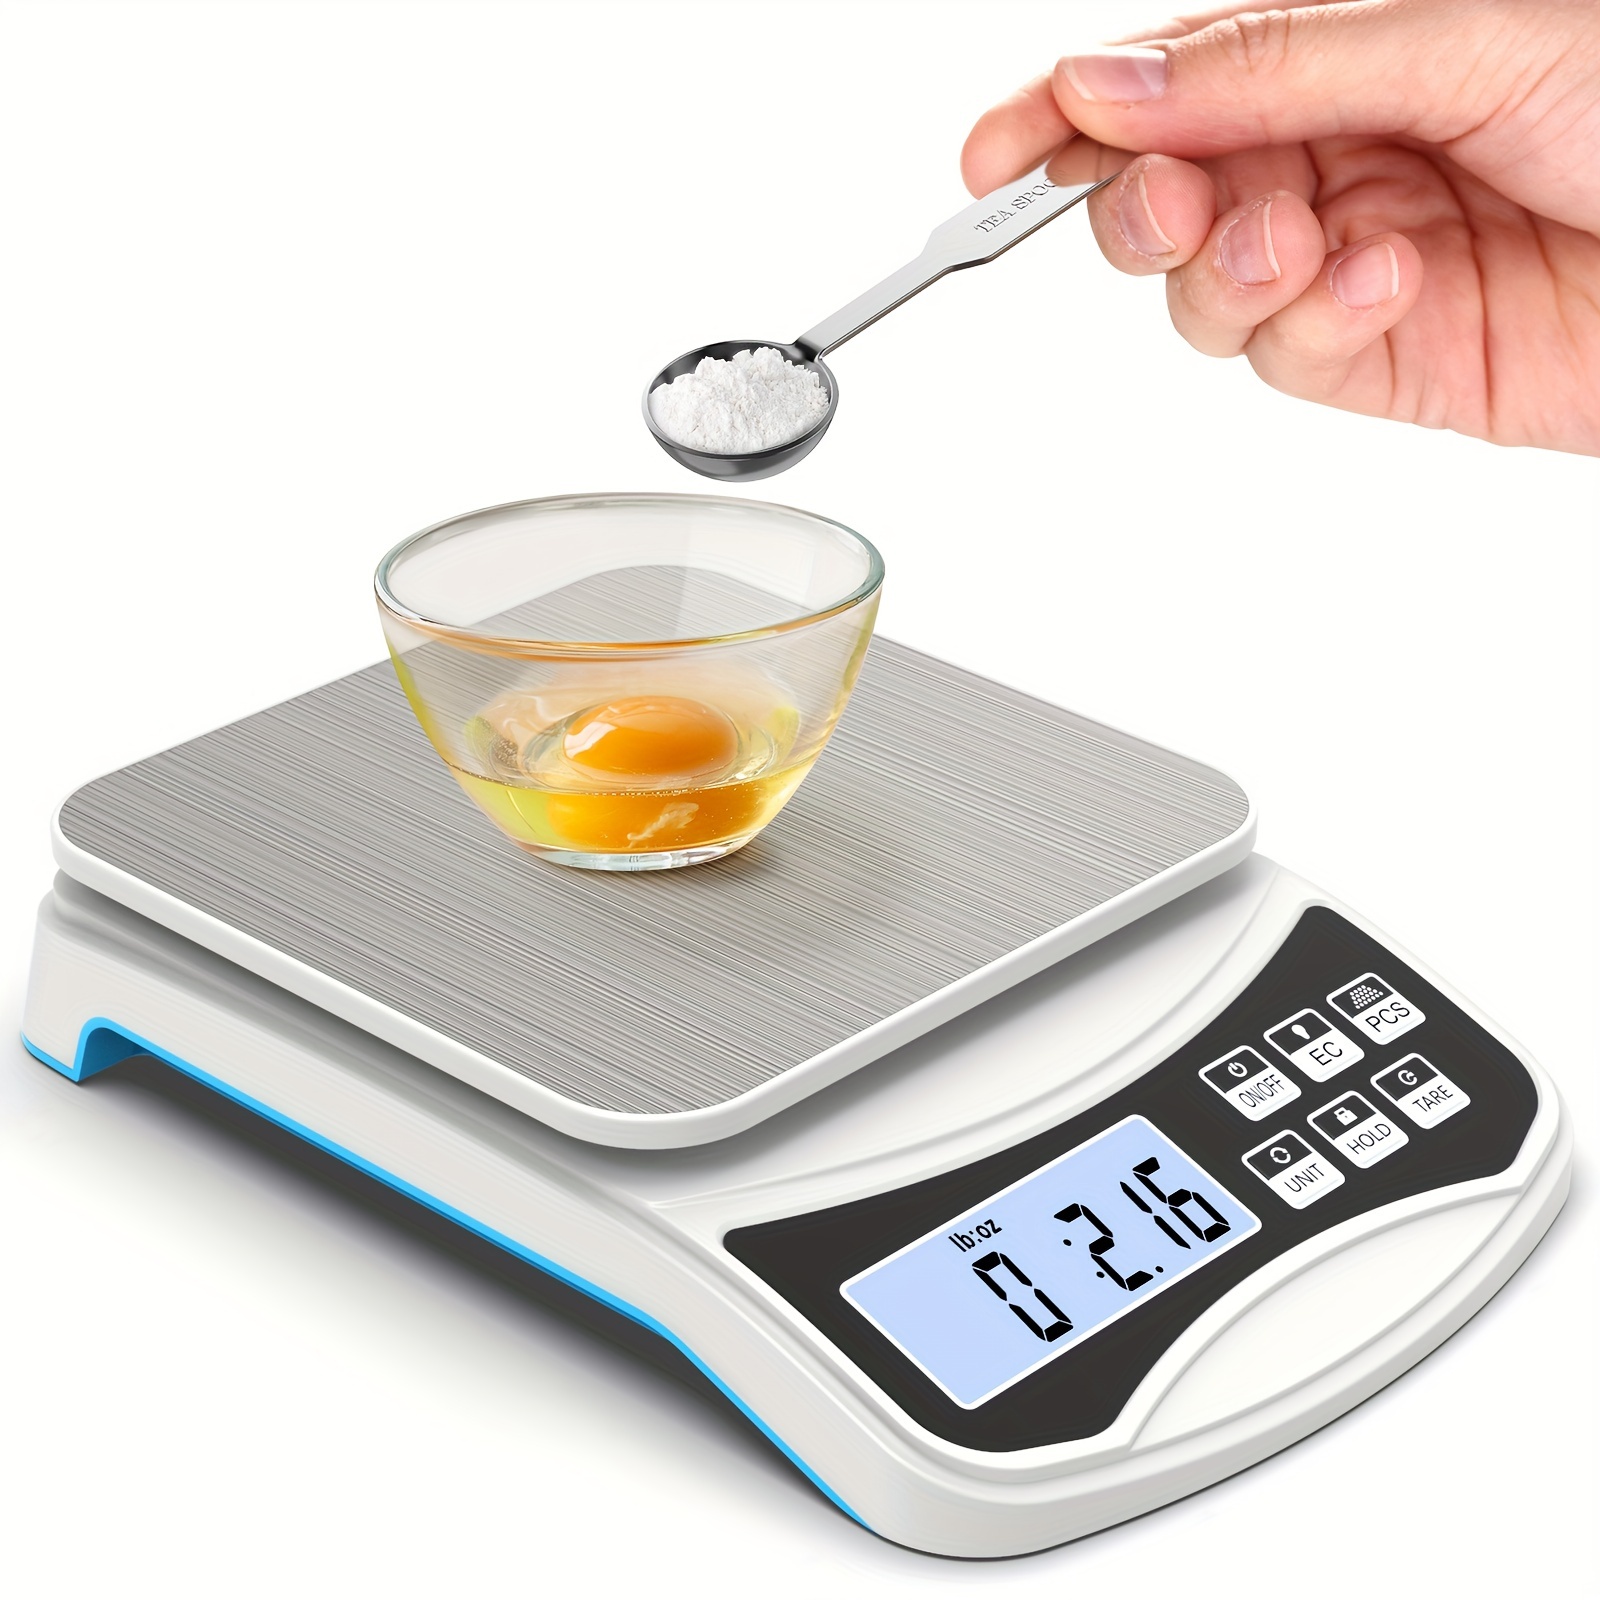  Etekcity Food Kitchen Scale, Digital Mechanical Weighing Scale,Grams  and Ounces for Weight Loss, Baking, Cooking, Keto and Meal Prep, Large,  Matte Black: Home & Kitchen